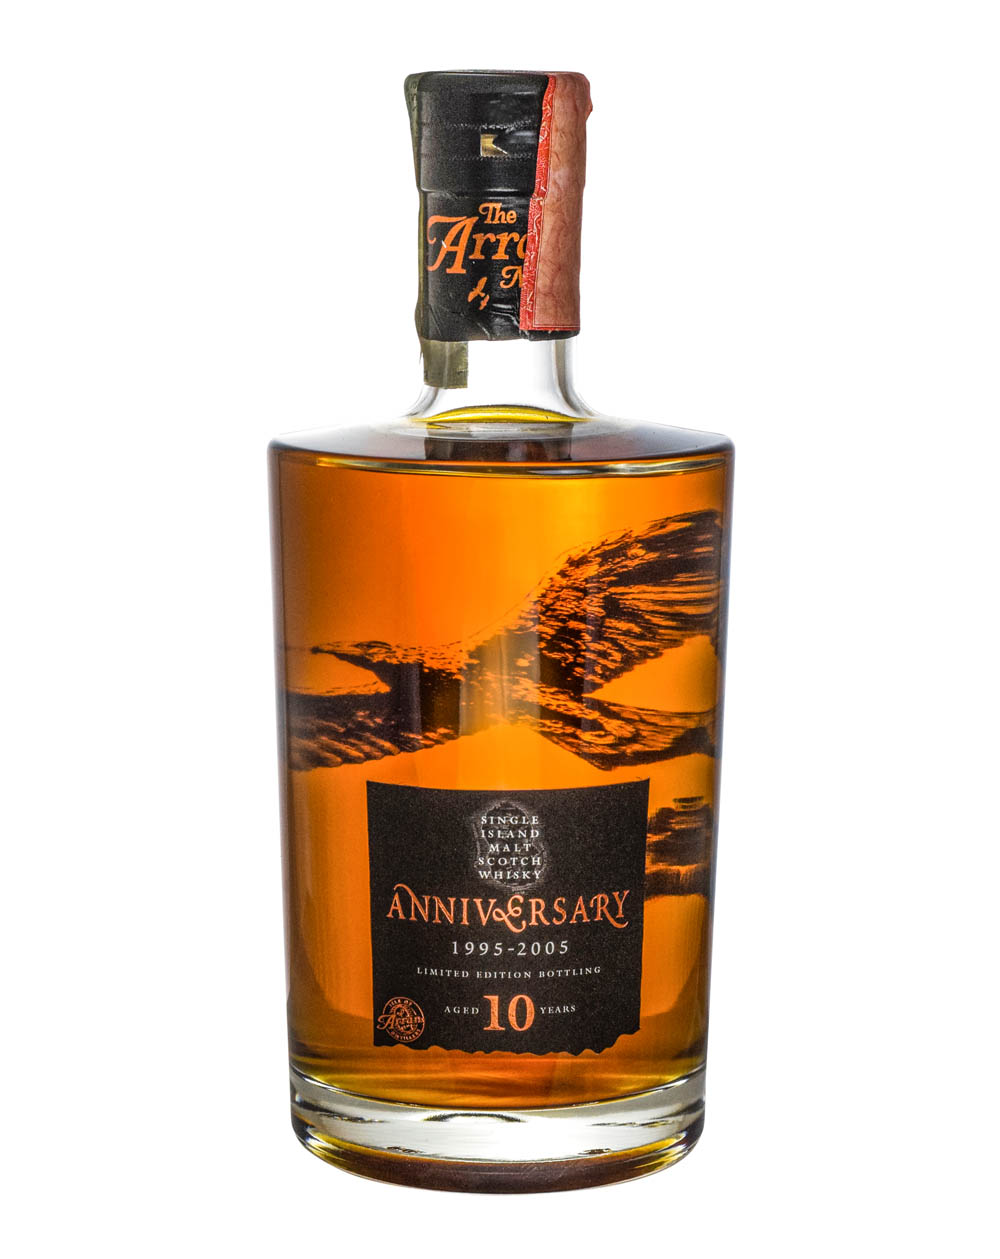 The Arran 10 Year Old Scotch Whisky